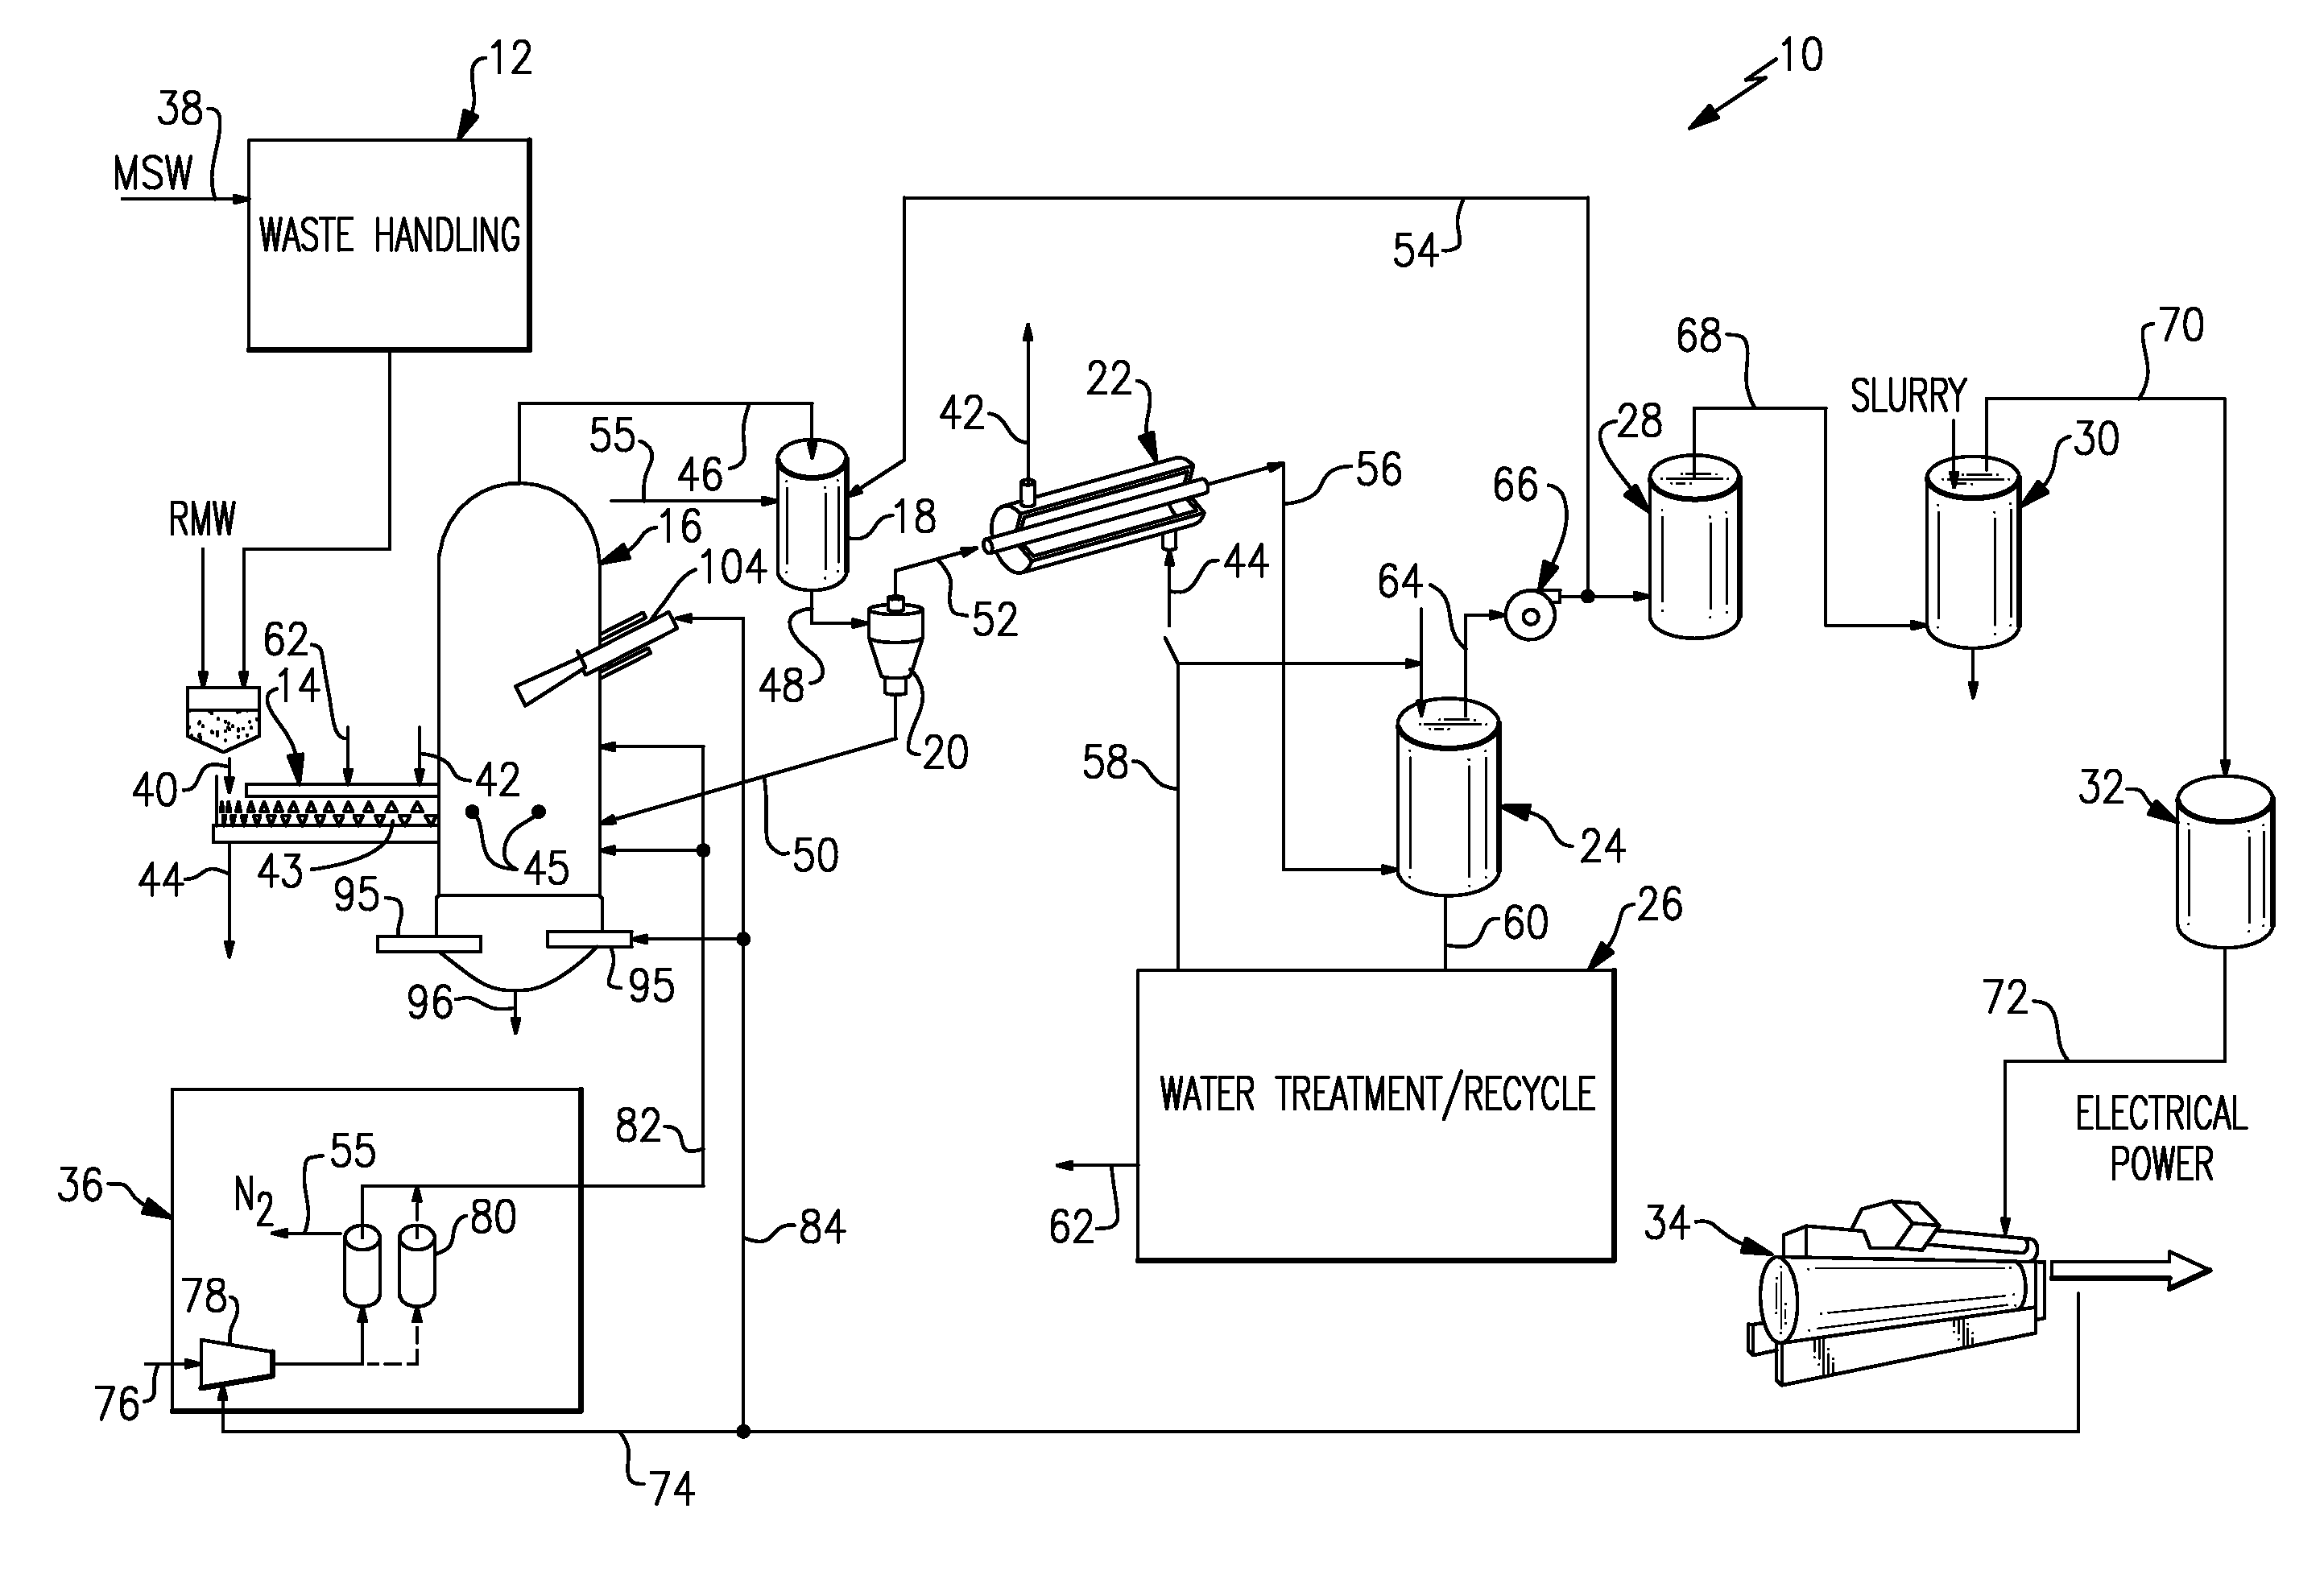 Plasma-assisted waste gasification system